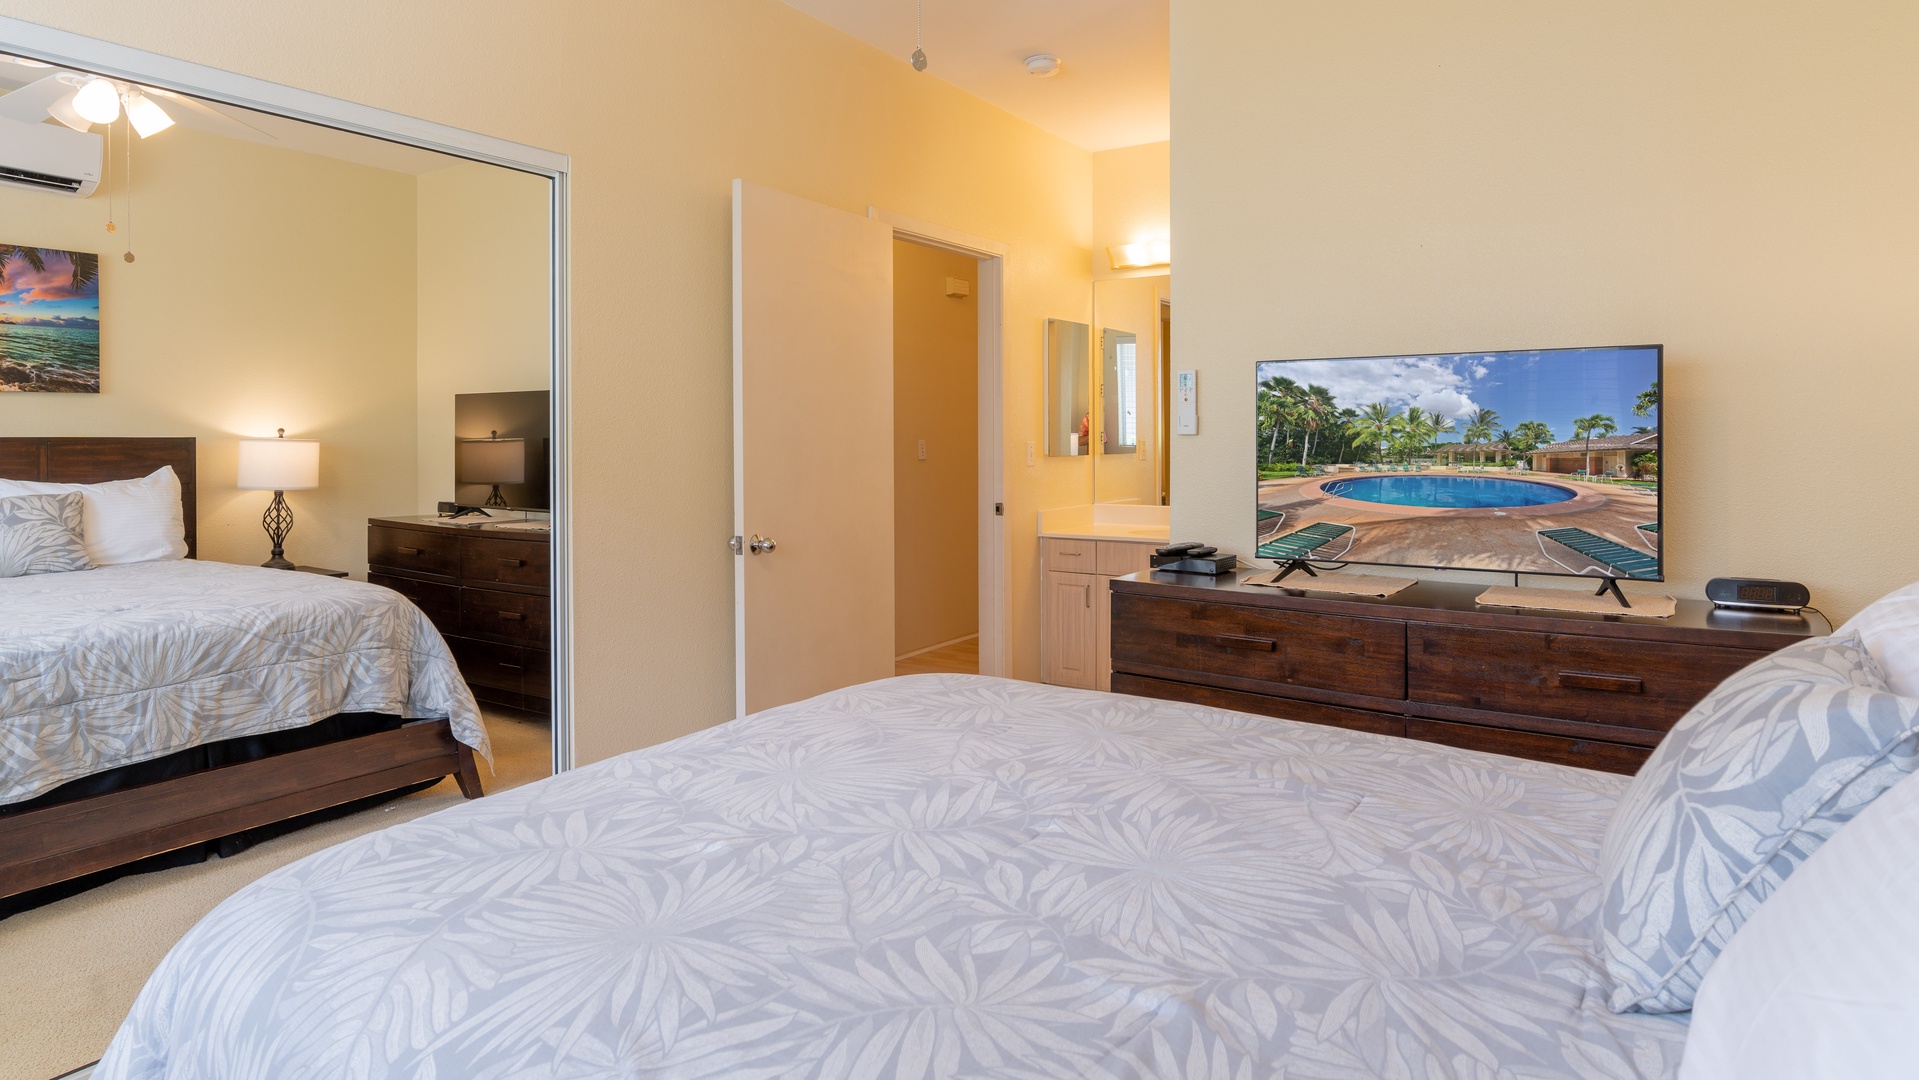 Kapolei Vacation Rentals, Fairways at Ko Olina 18C - The primary guest bedroom also provides a dresser for storage.